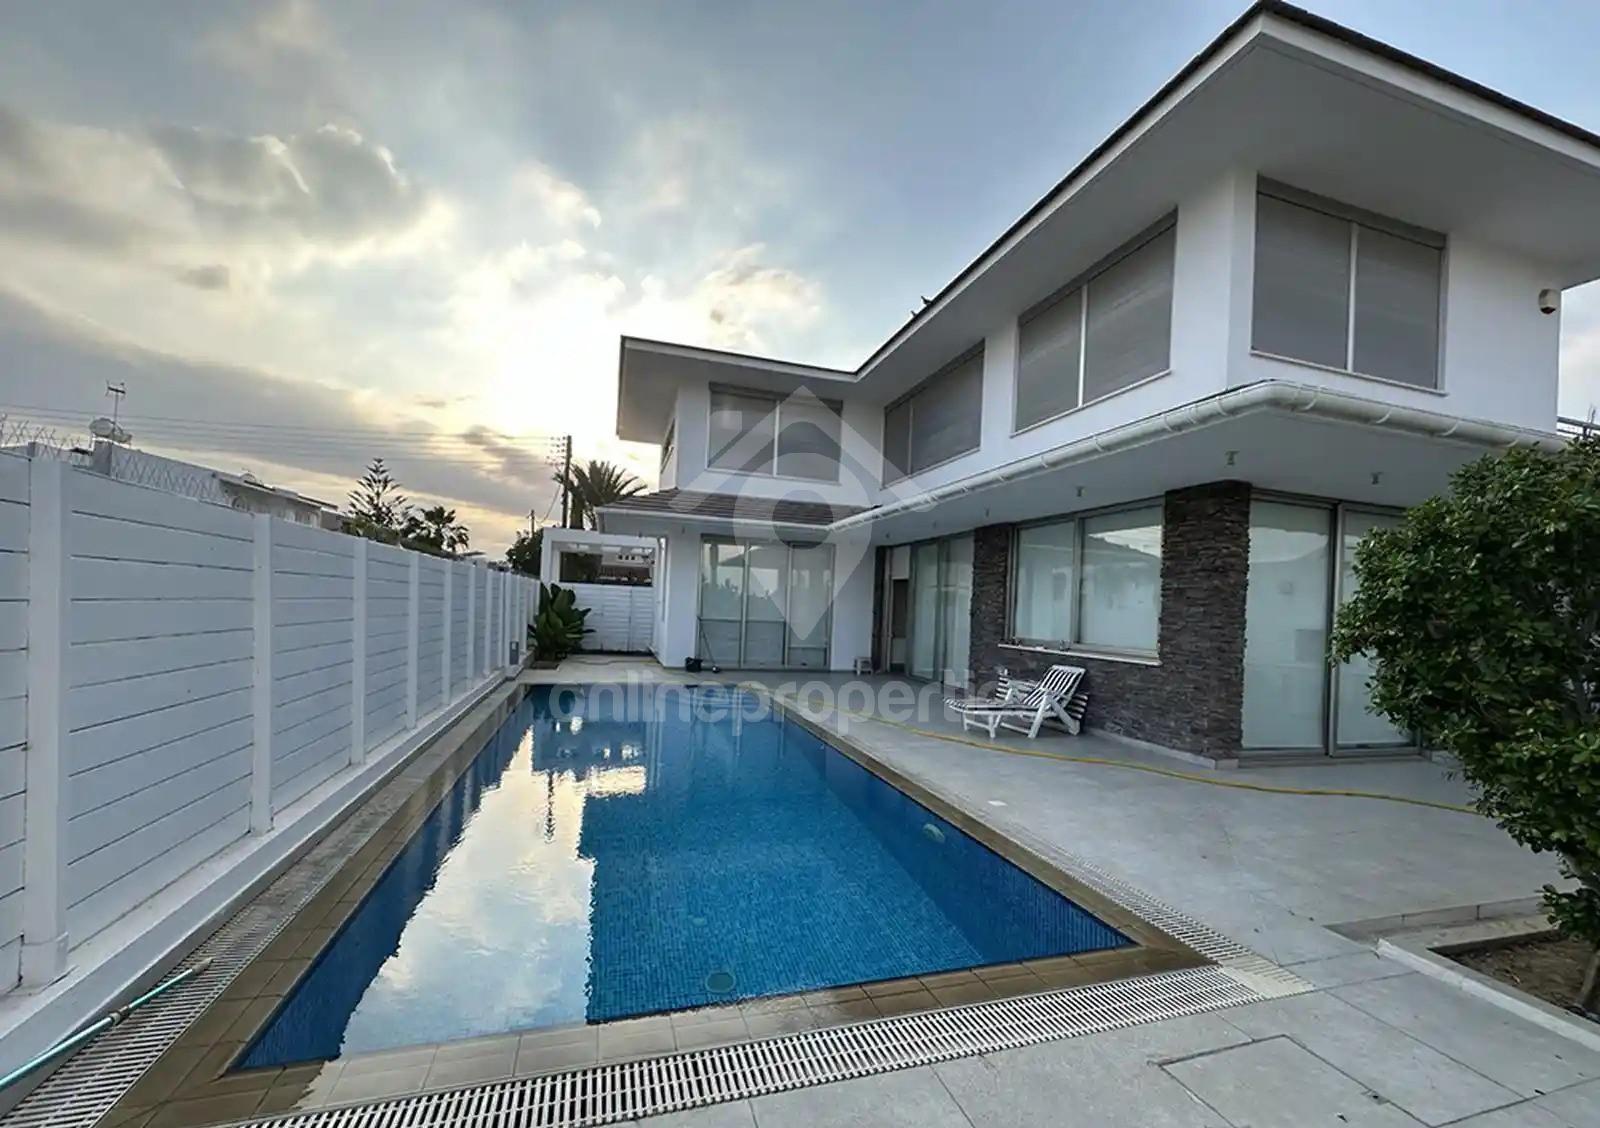 Luxurious Abode for Rent in Lakatameia-Nicosia: Exquisite Residence with Unmatched Elegance